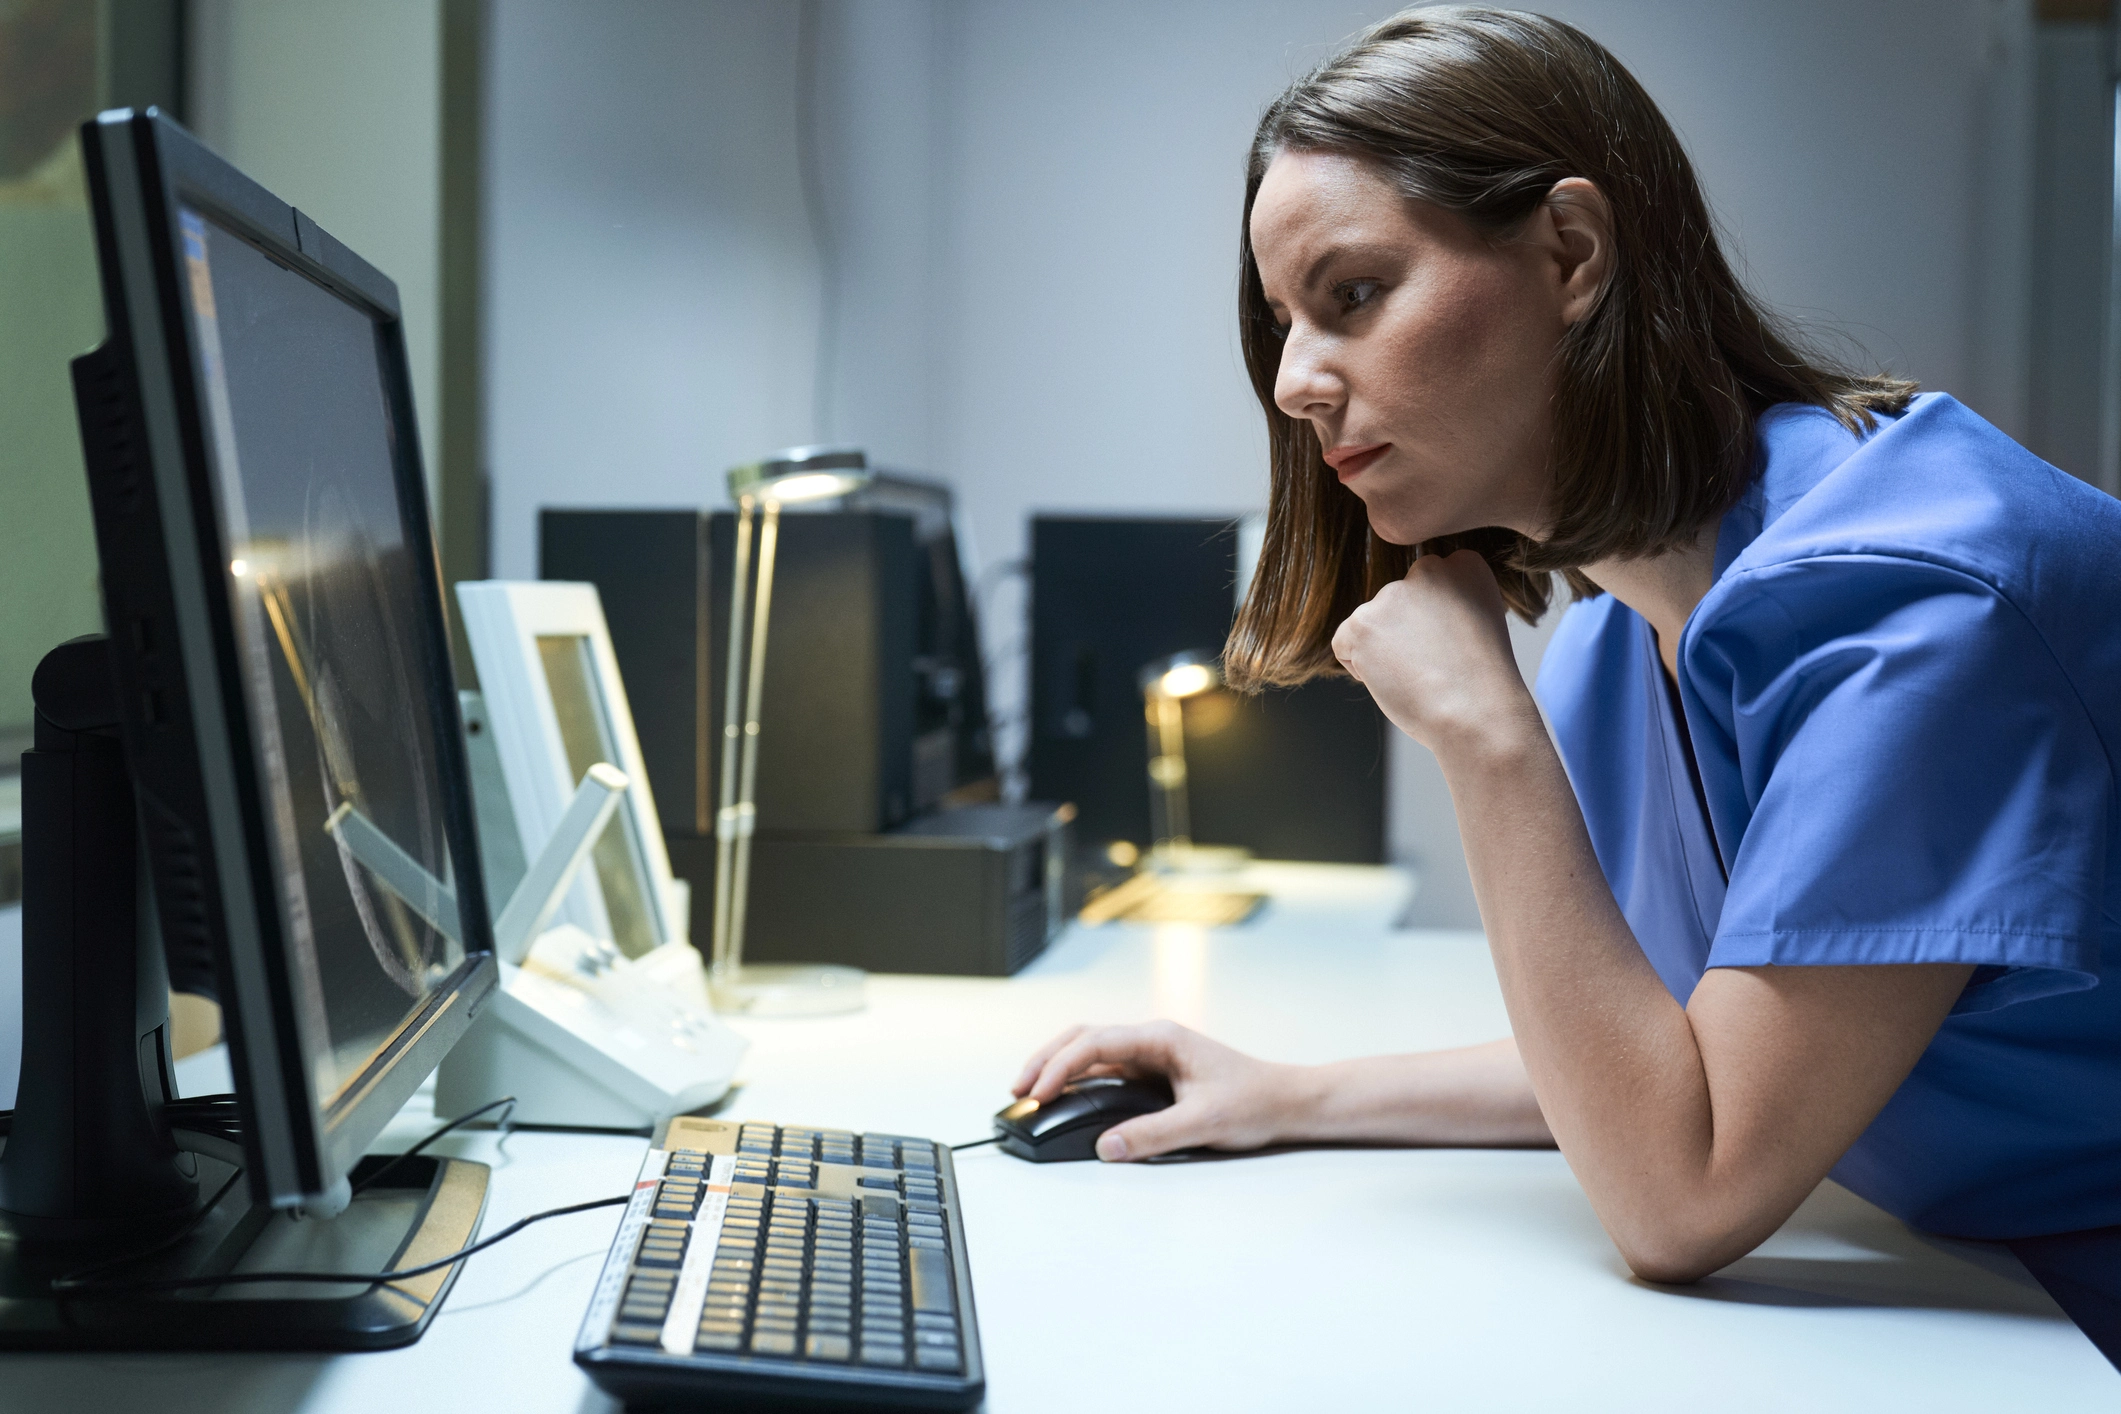 A healthcare worker uses a desktop computer to review patient care data.